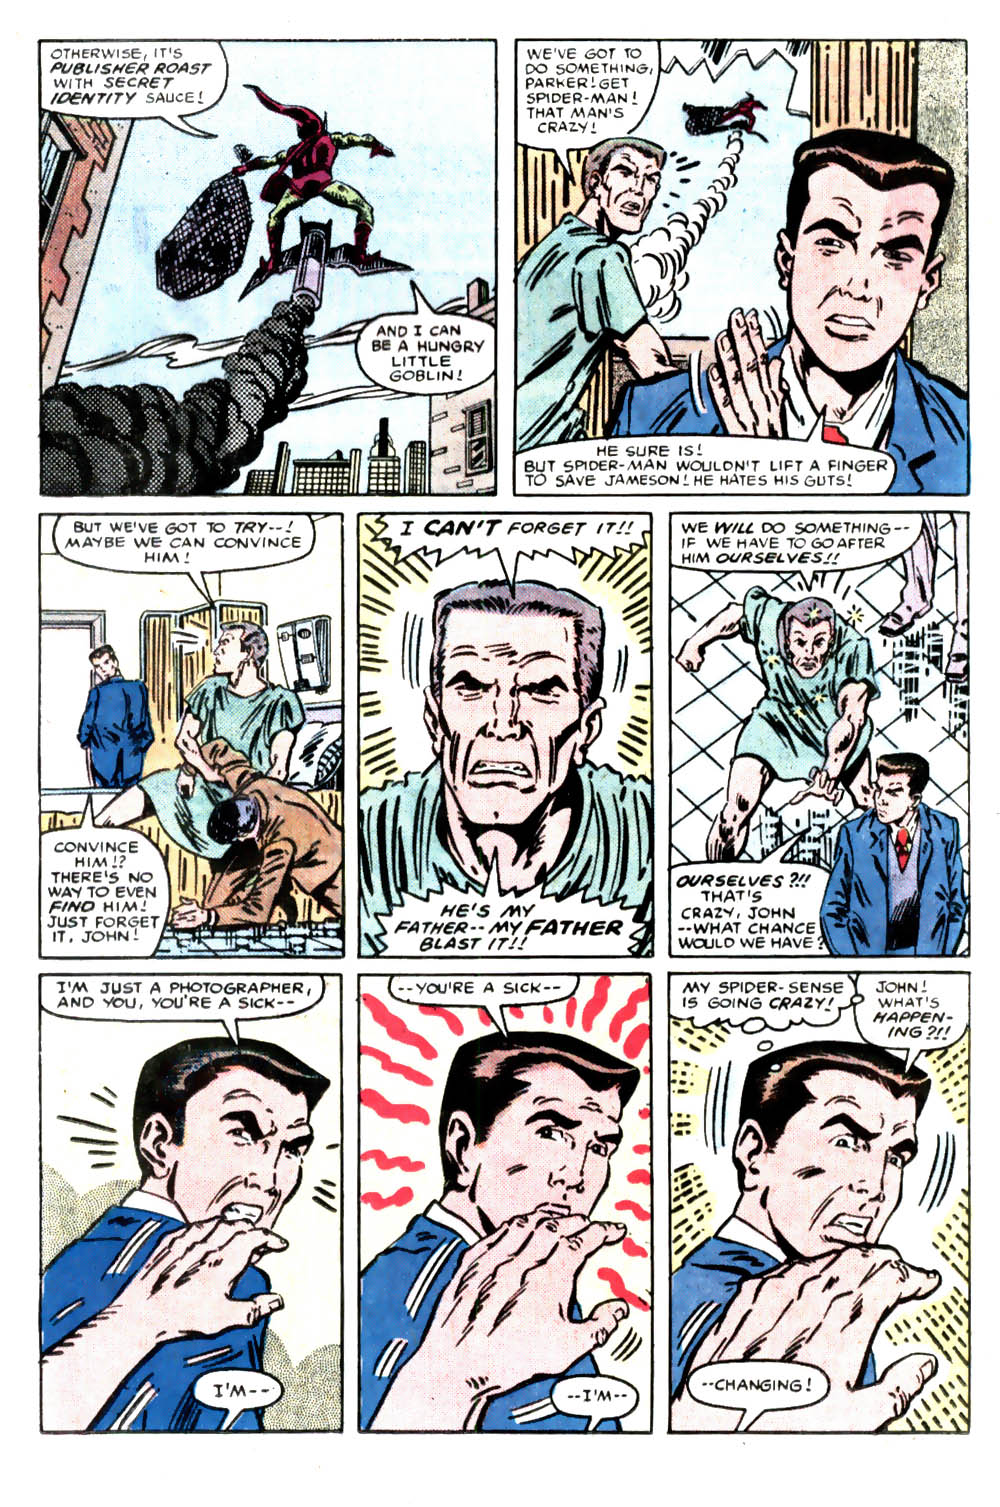 What If? (1977) issue 46 - Spiderman's uncle ben had lived - Page 34